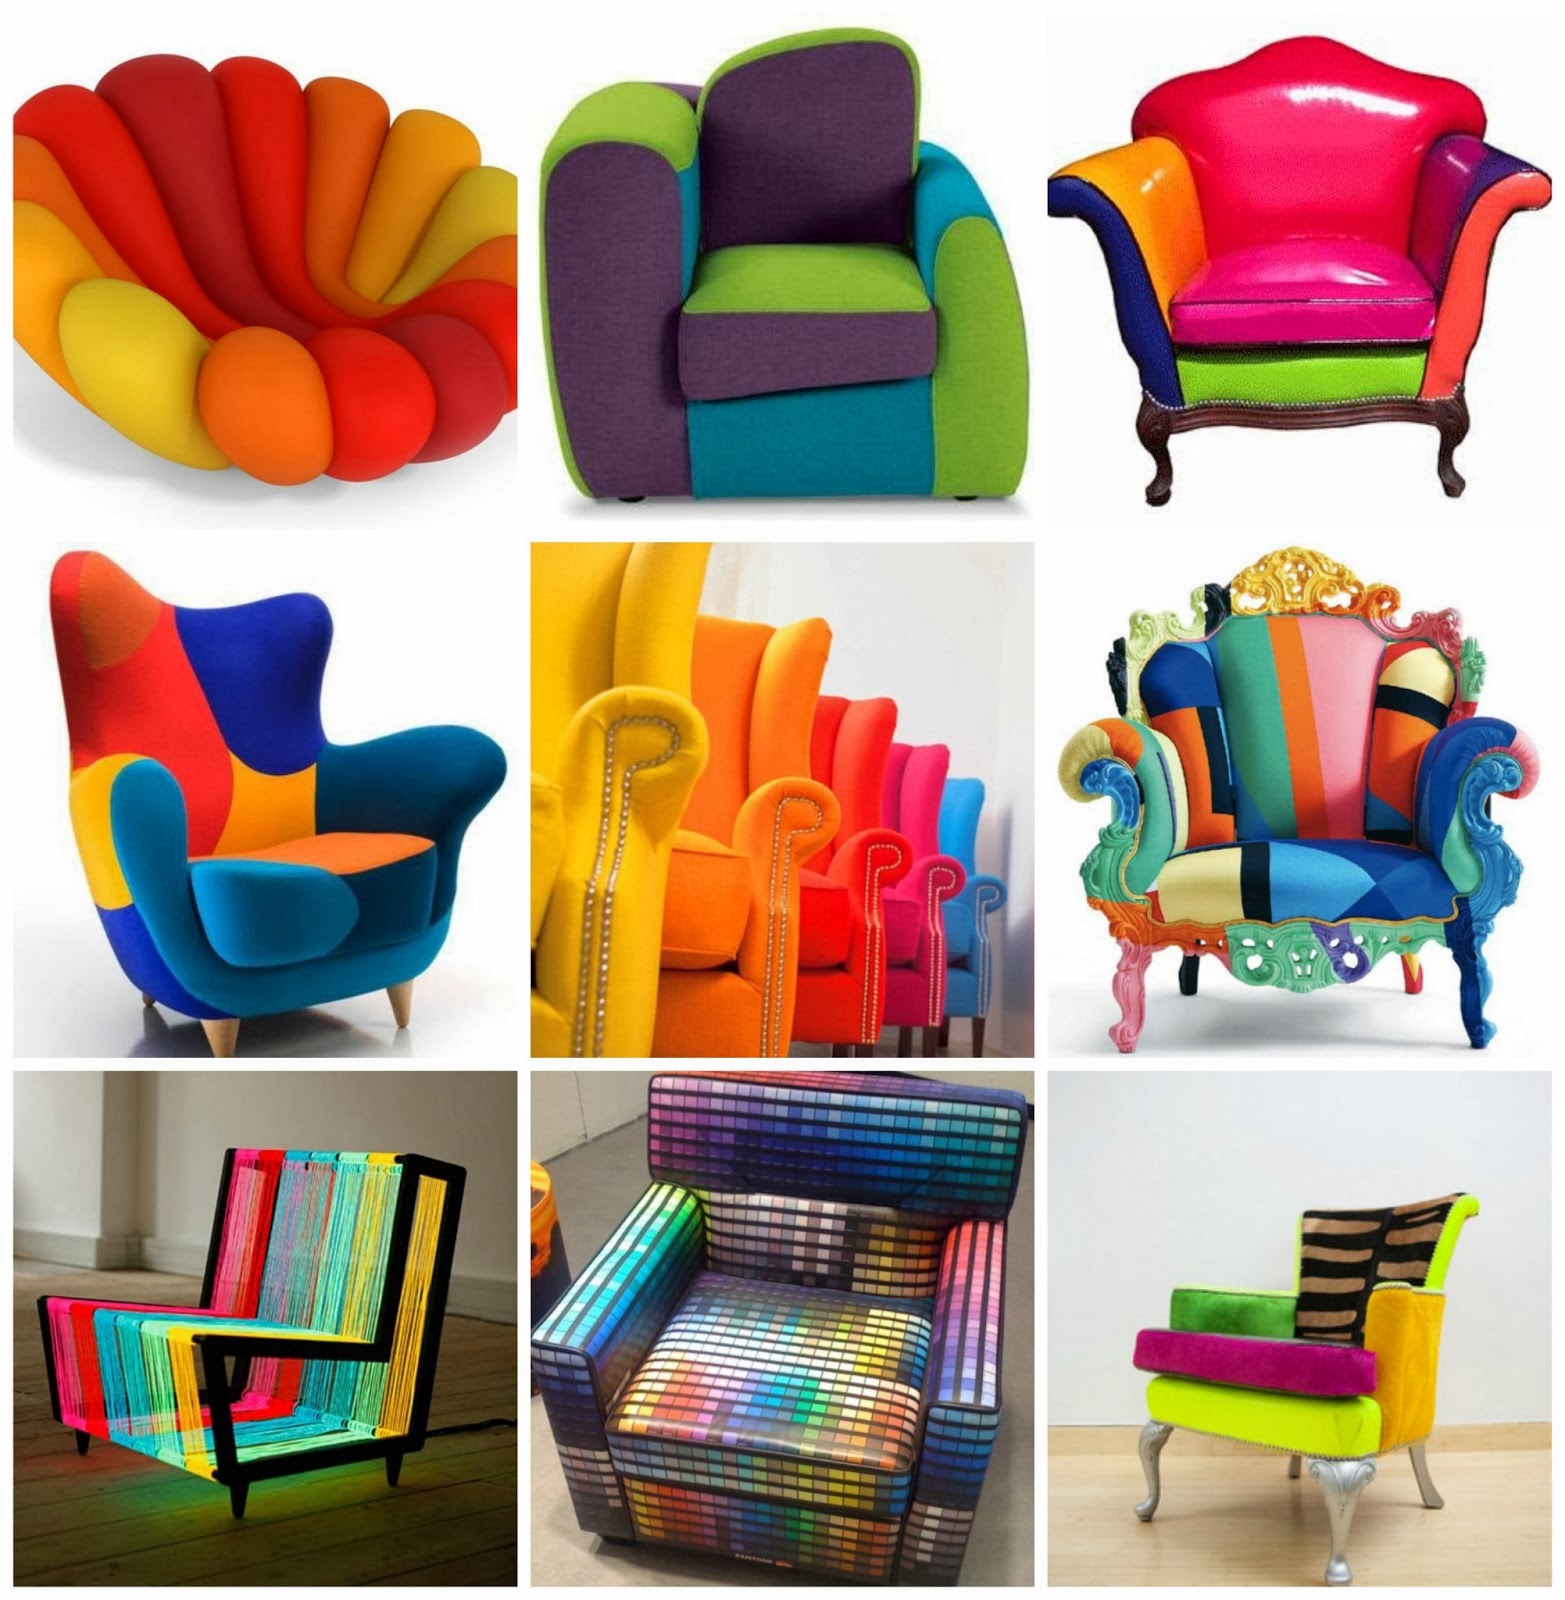 The Colorful White: Colorful Chairs